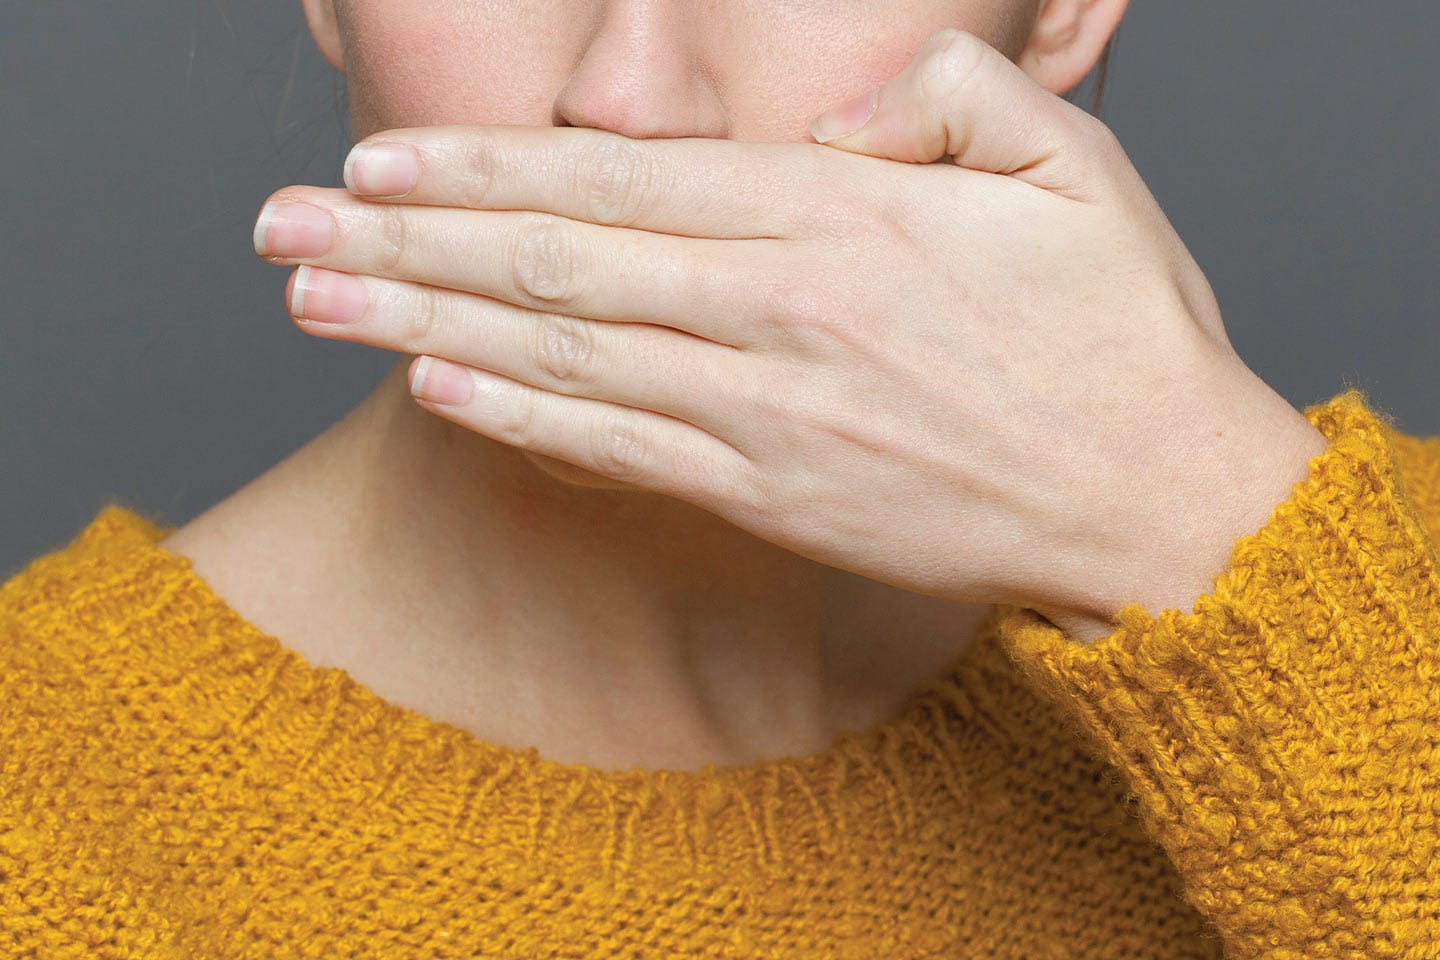 Woman covering her mouth because of unsightly gum disease